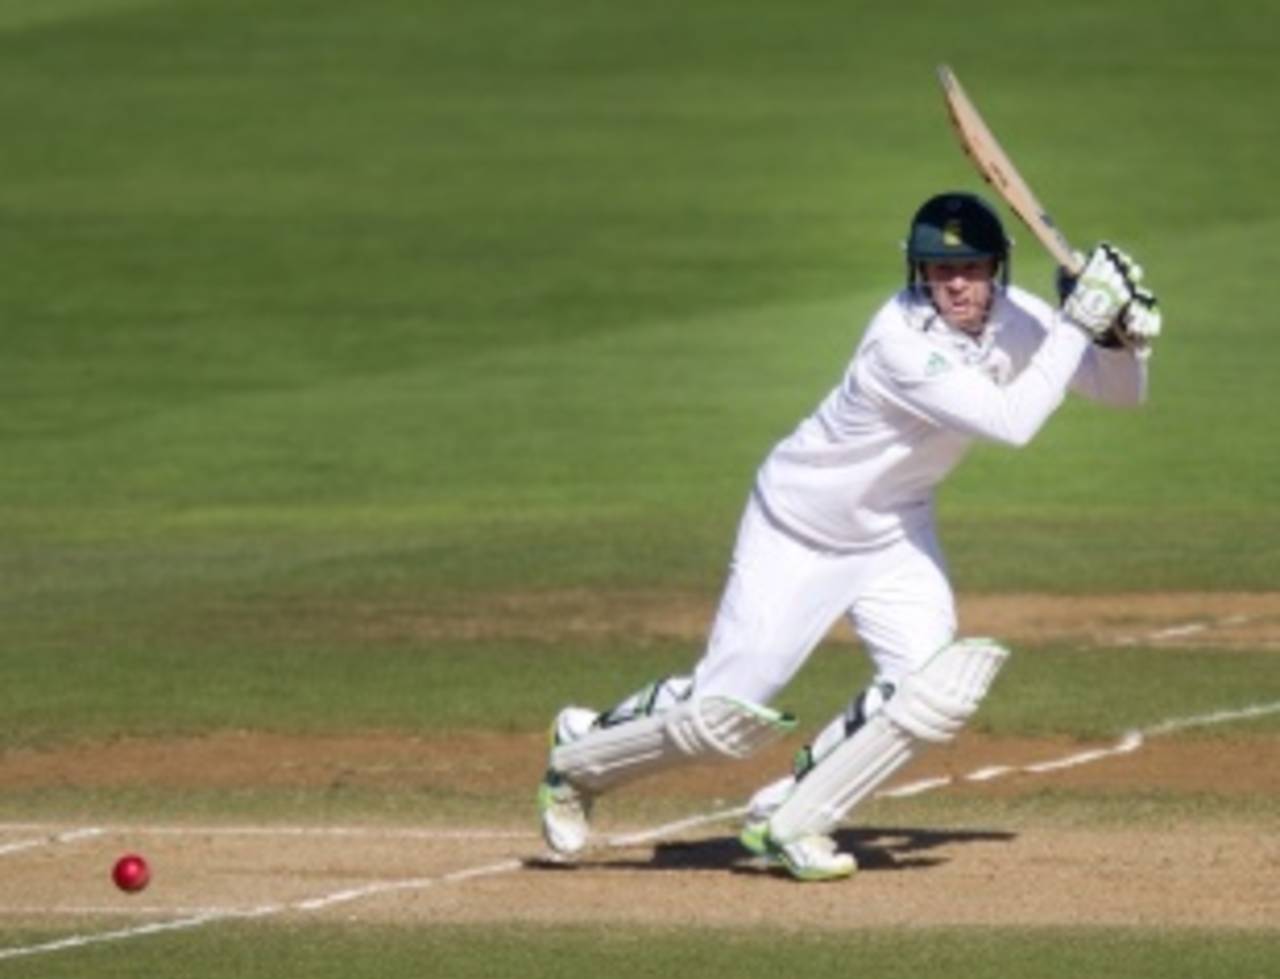 AB de Villiers made 68 off 49 balls, New Zealand v South Africa, 3rd Test, Wellington, 5th day, March 27, 2012